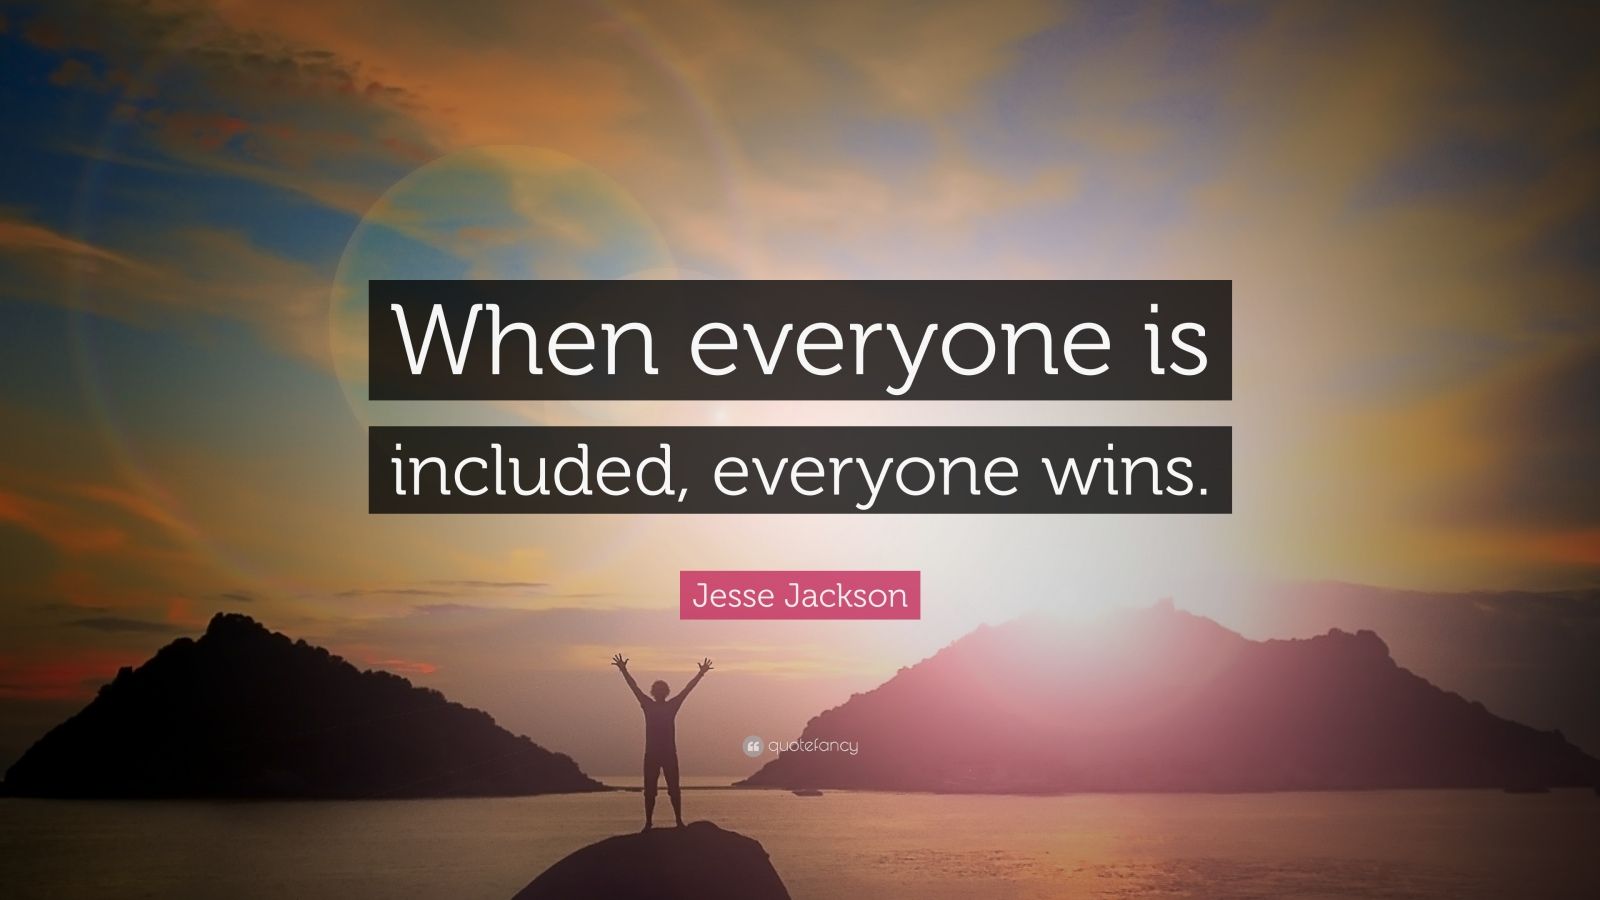 Jesse Jackson Quote: “When everyone is included, everyone wins.”